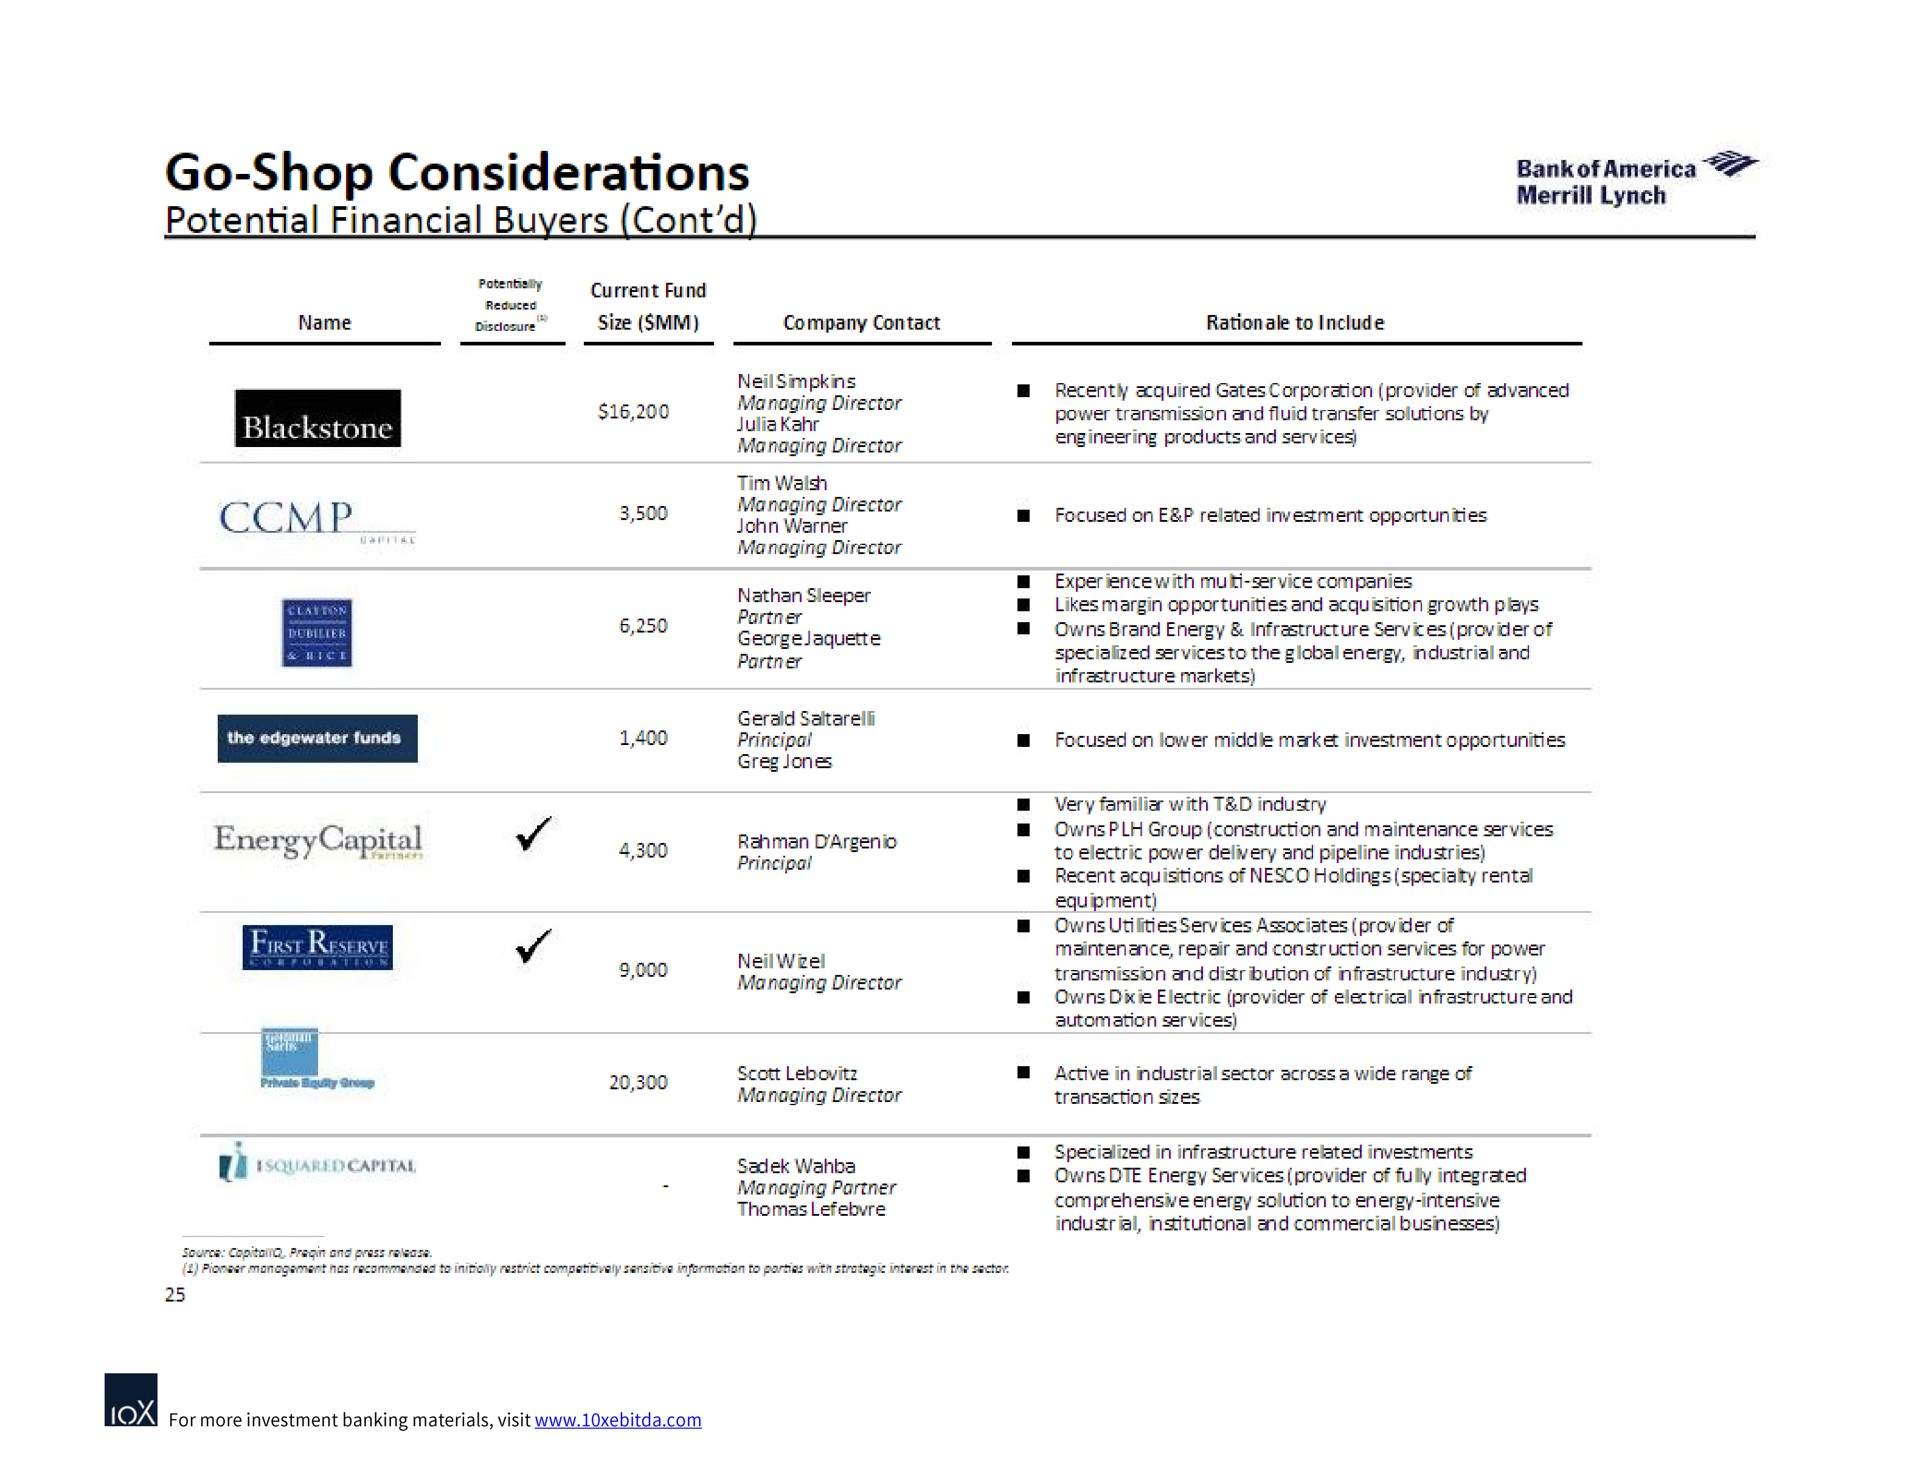 go shop considerations potential financial buyers | Bank of America